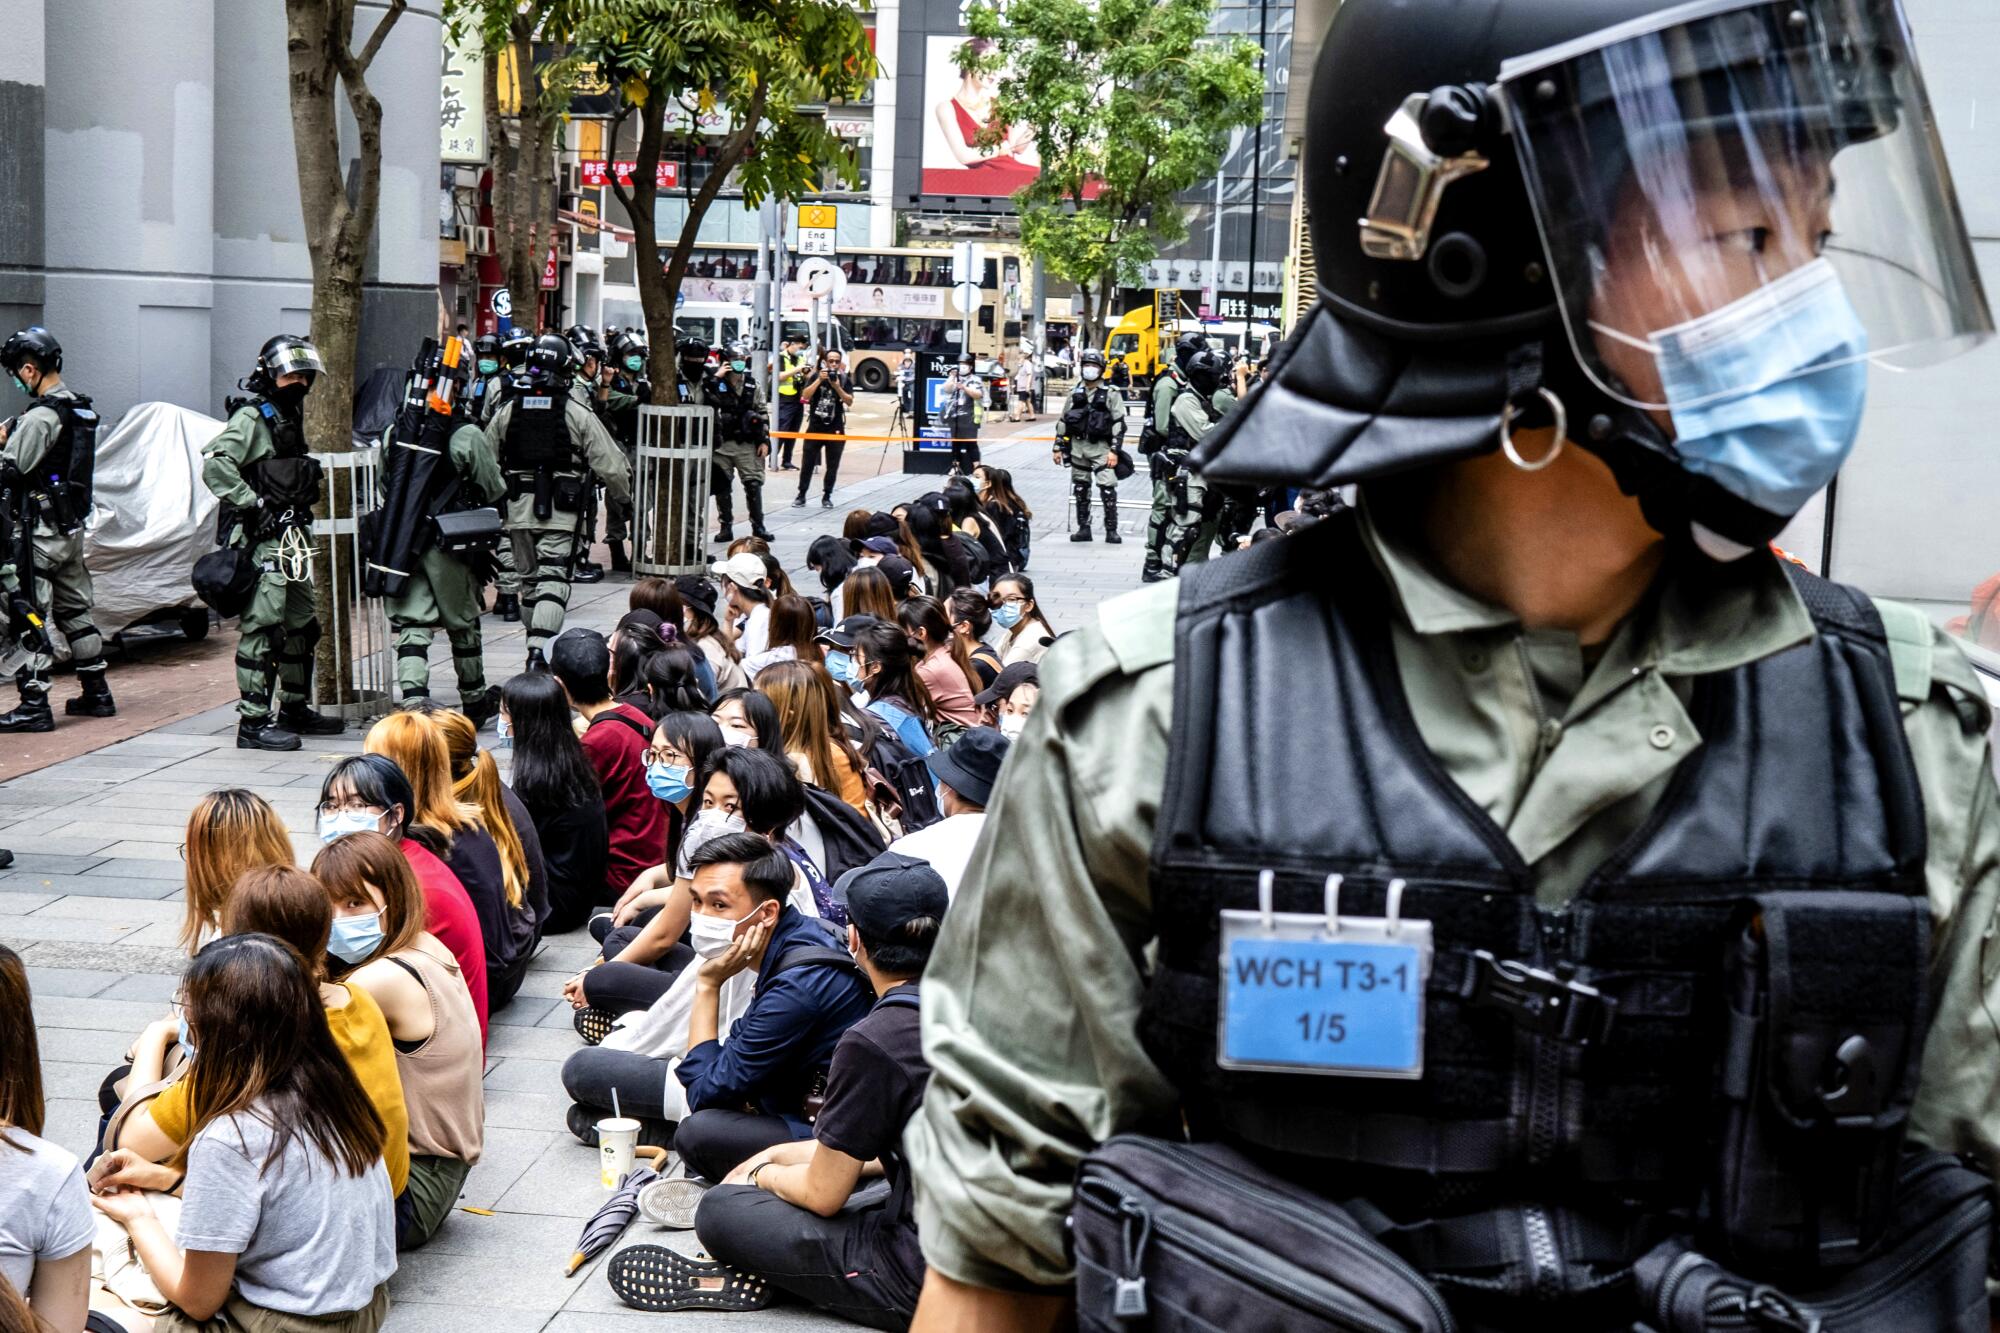 Riot police surround a group of pro-democracy protesters in Hong Kong.